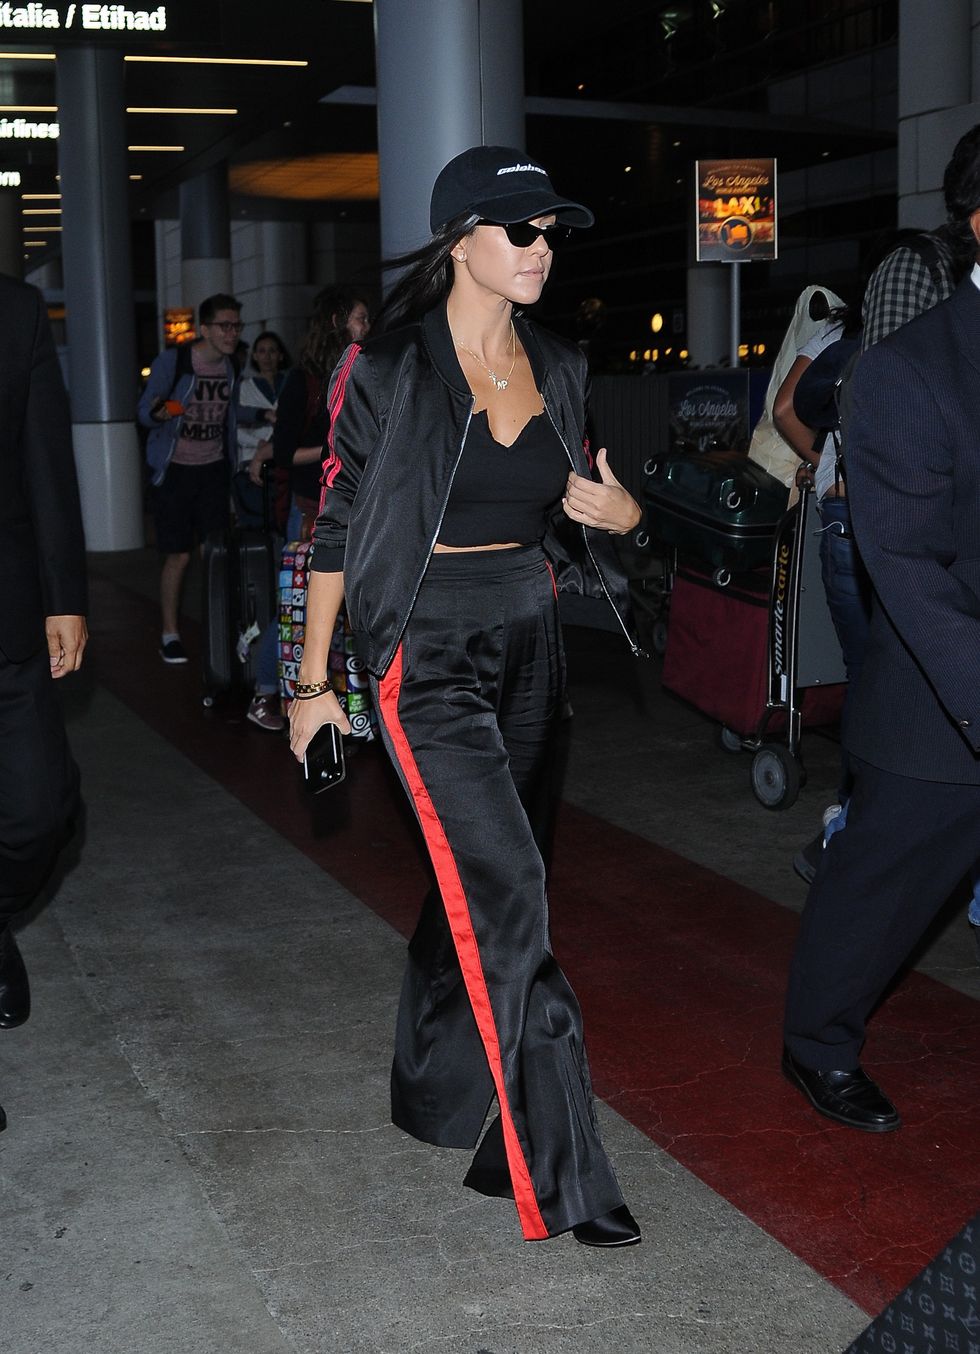 LOS ANGELES, CA - JUNE 30: Kourtney Kardashian is seen at LAX on June 30, 2017 in Los Angeles, California.  (Photo by LAXPICS/Bauer-Griffin/GC Images)